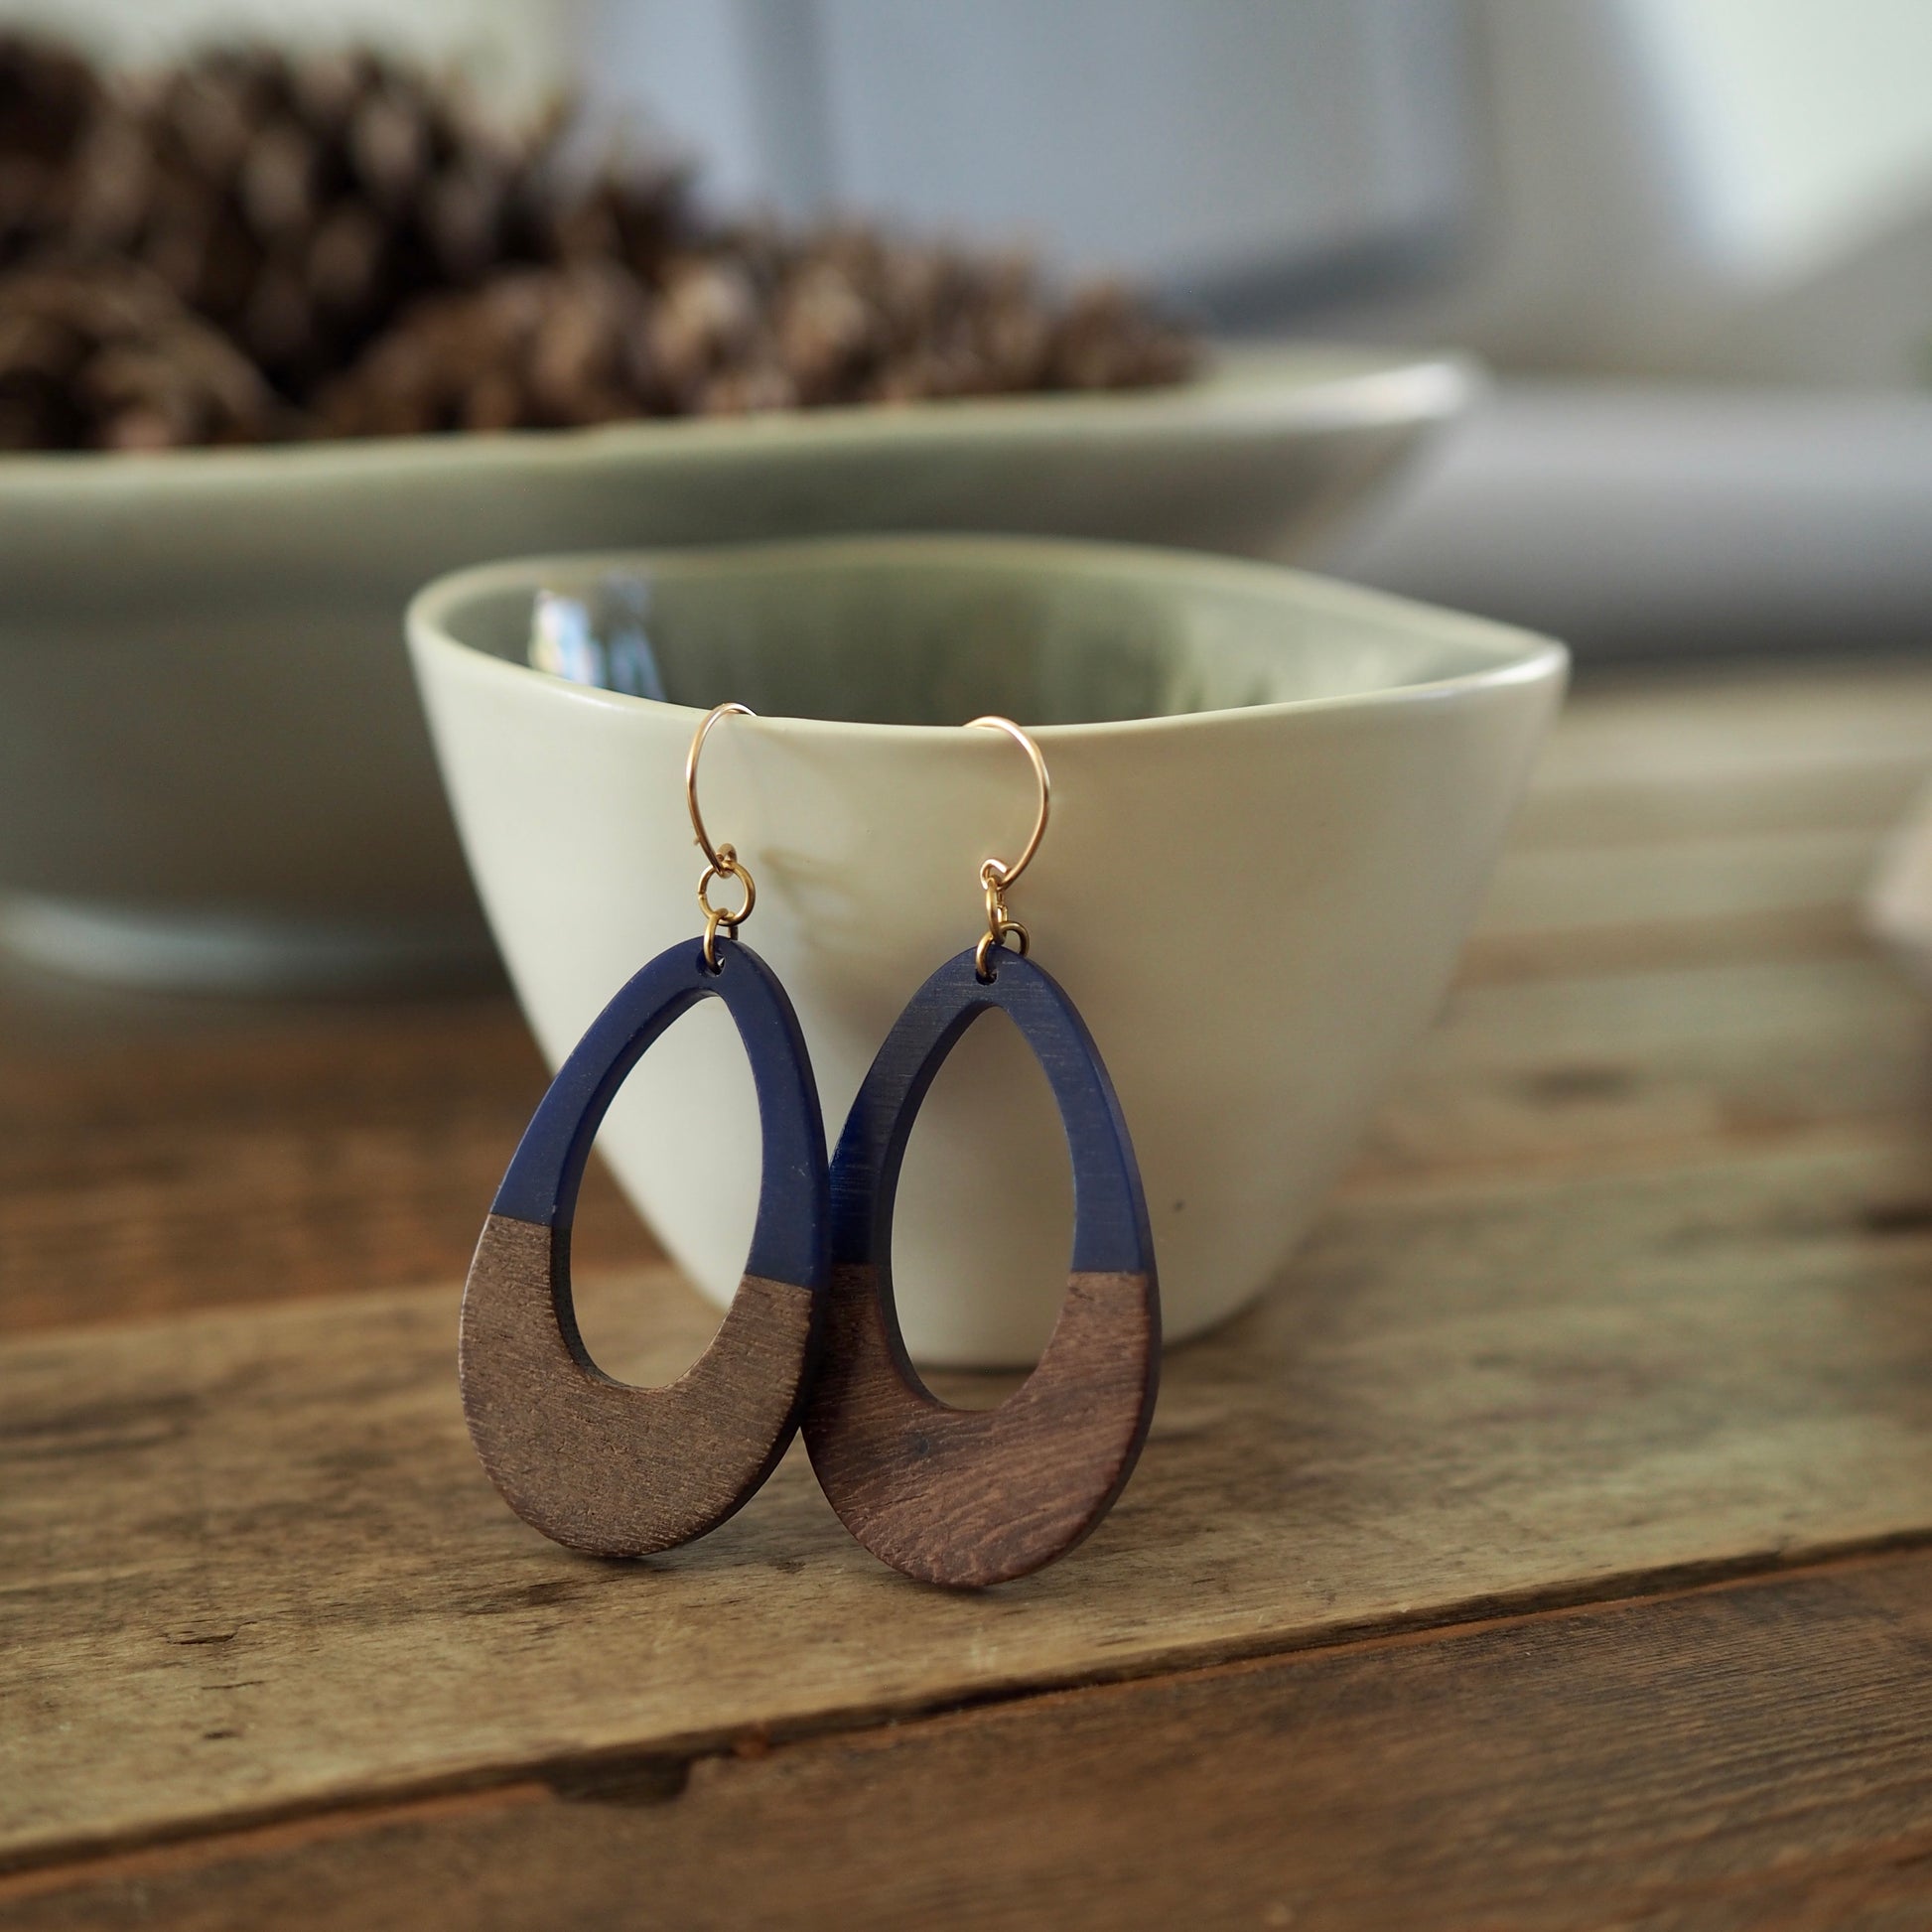 Navy and wood earring with 14K gold filled earwires